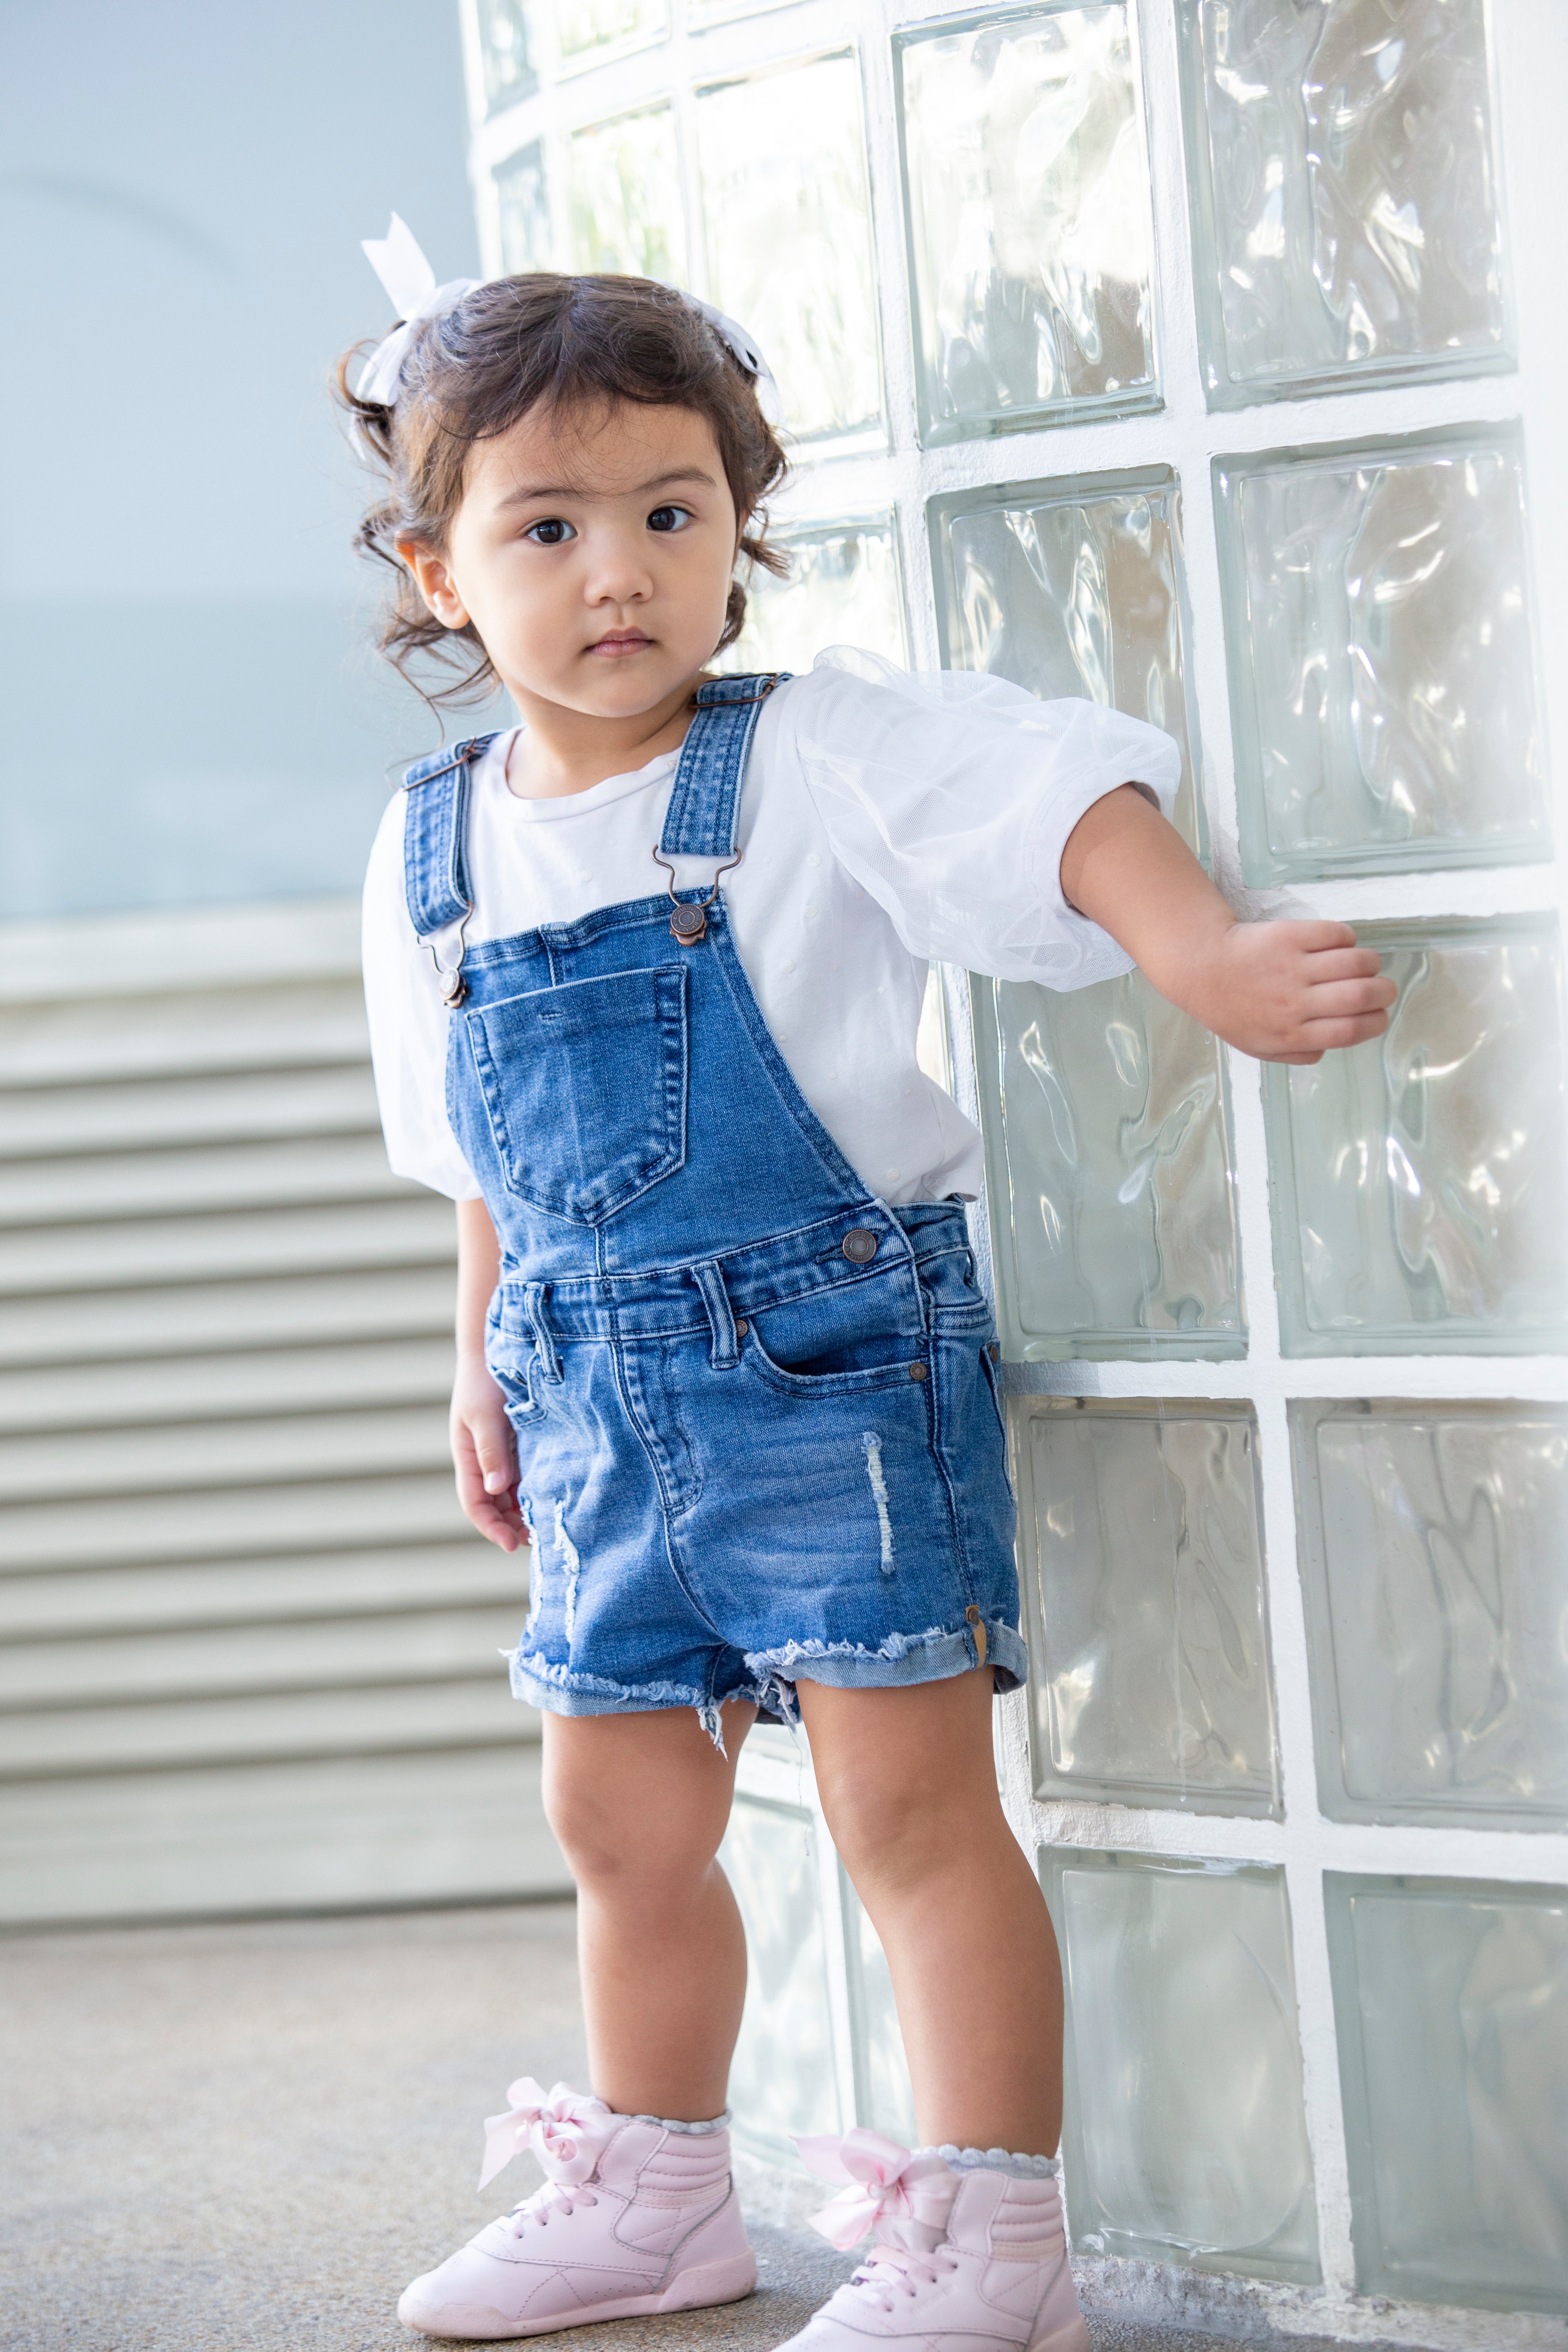 Girls Overall, Jeans !